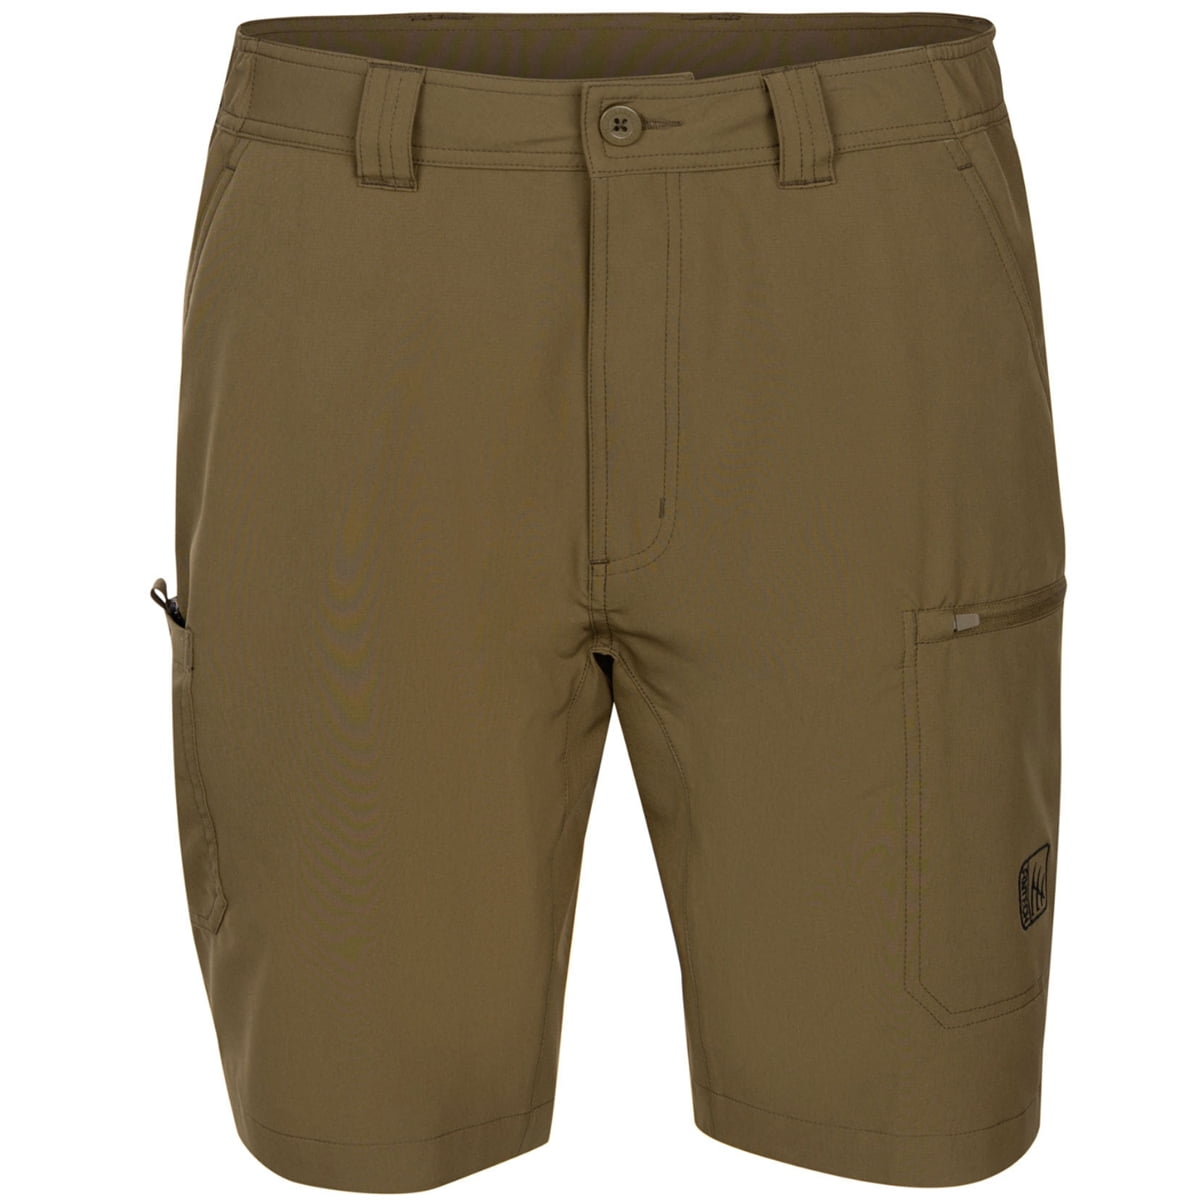 Fintech 10 Submariner Woven Shorts - Large - Military Olive